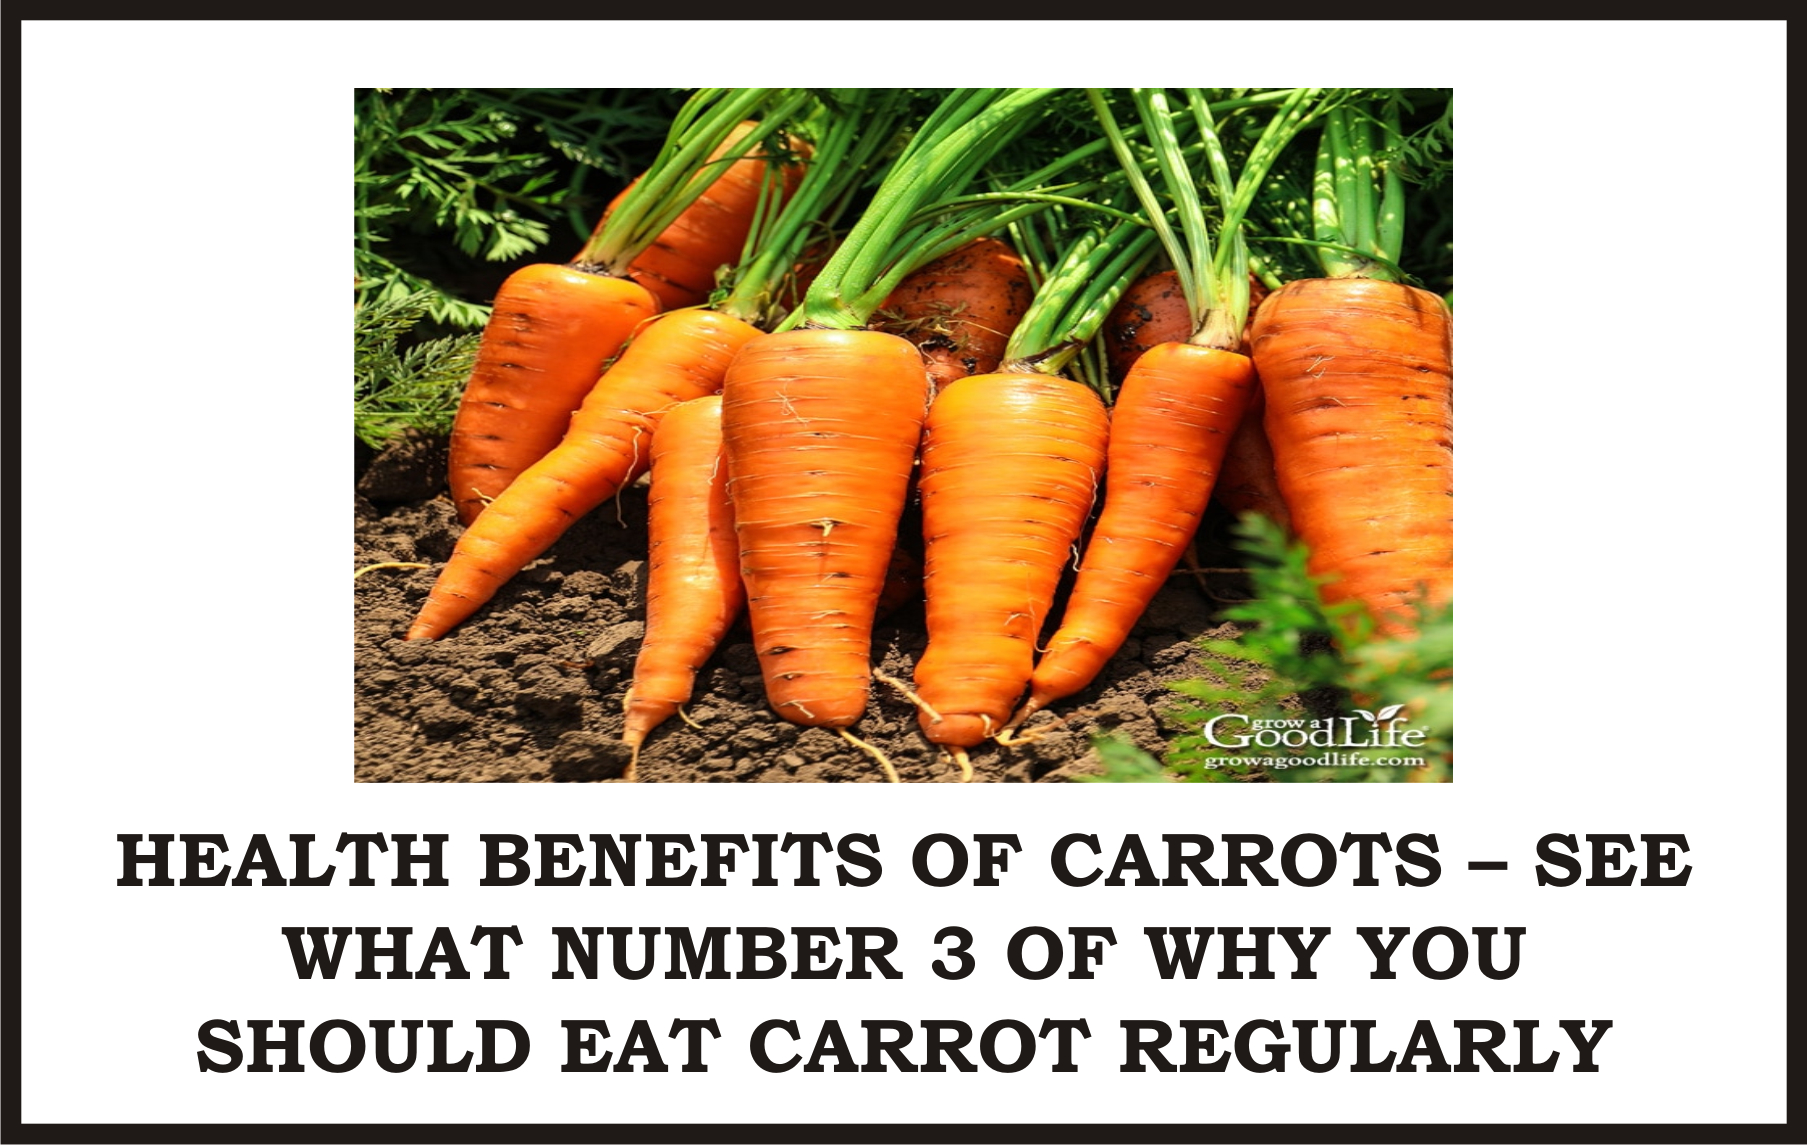 Health Benefits of Carrots – see what Number 3 of why you should Eat Carrot Regularly